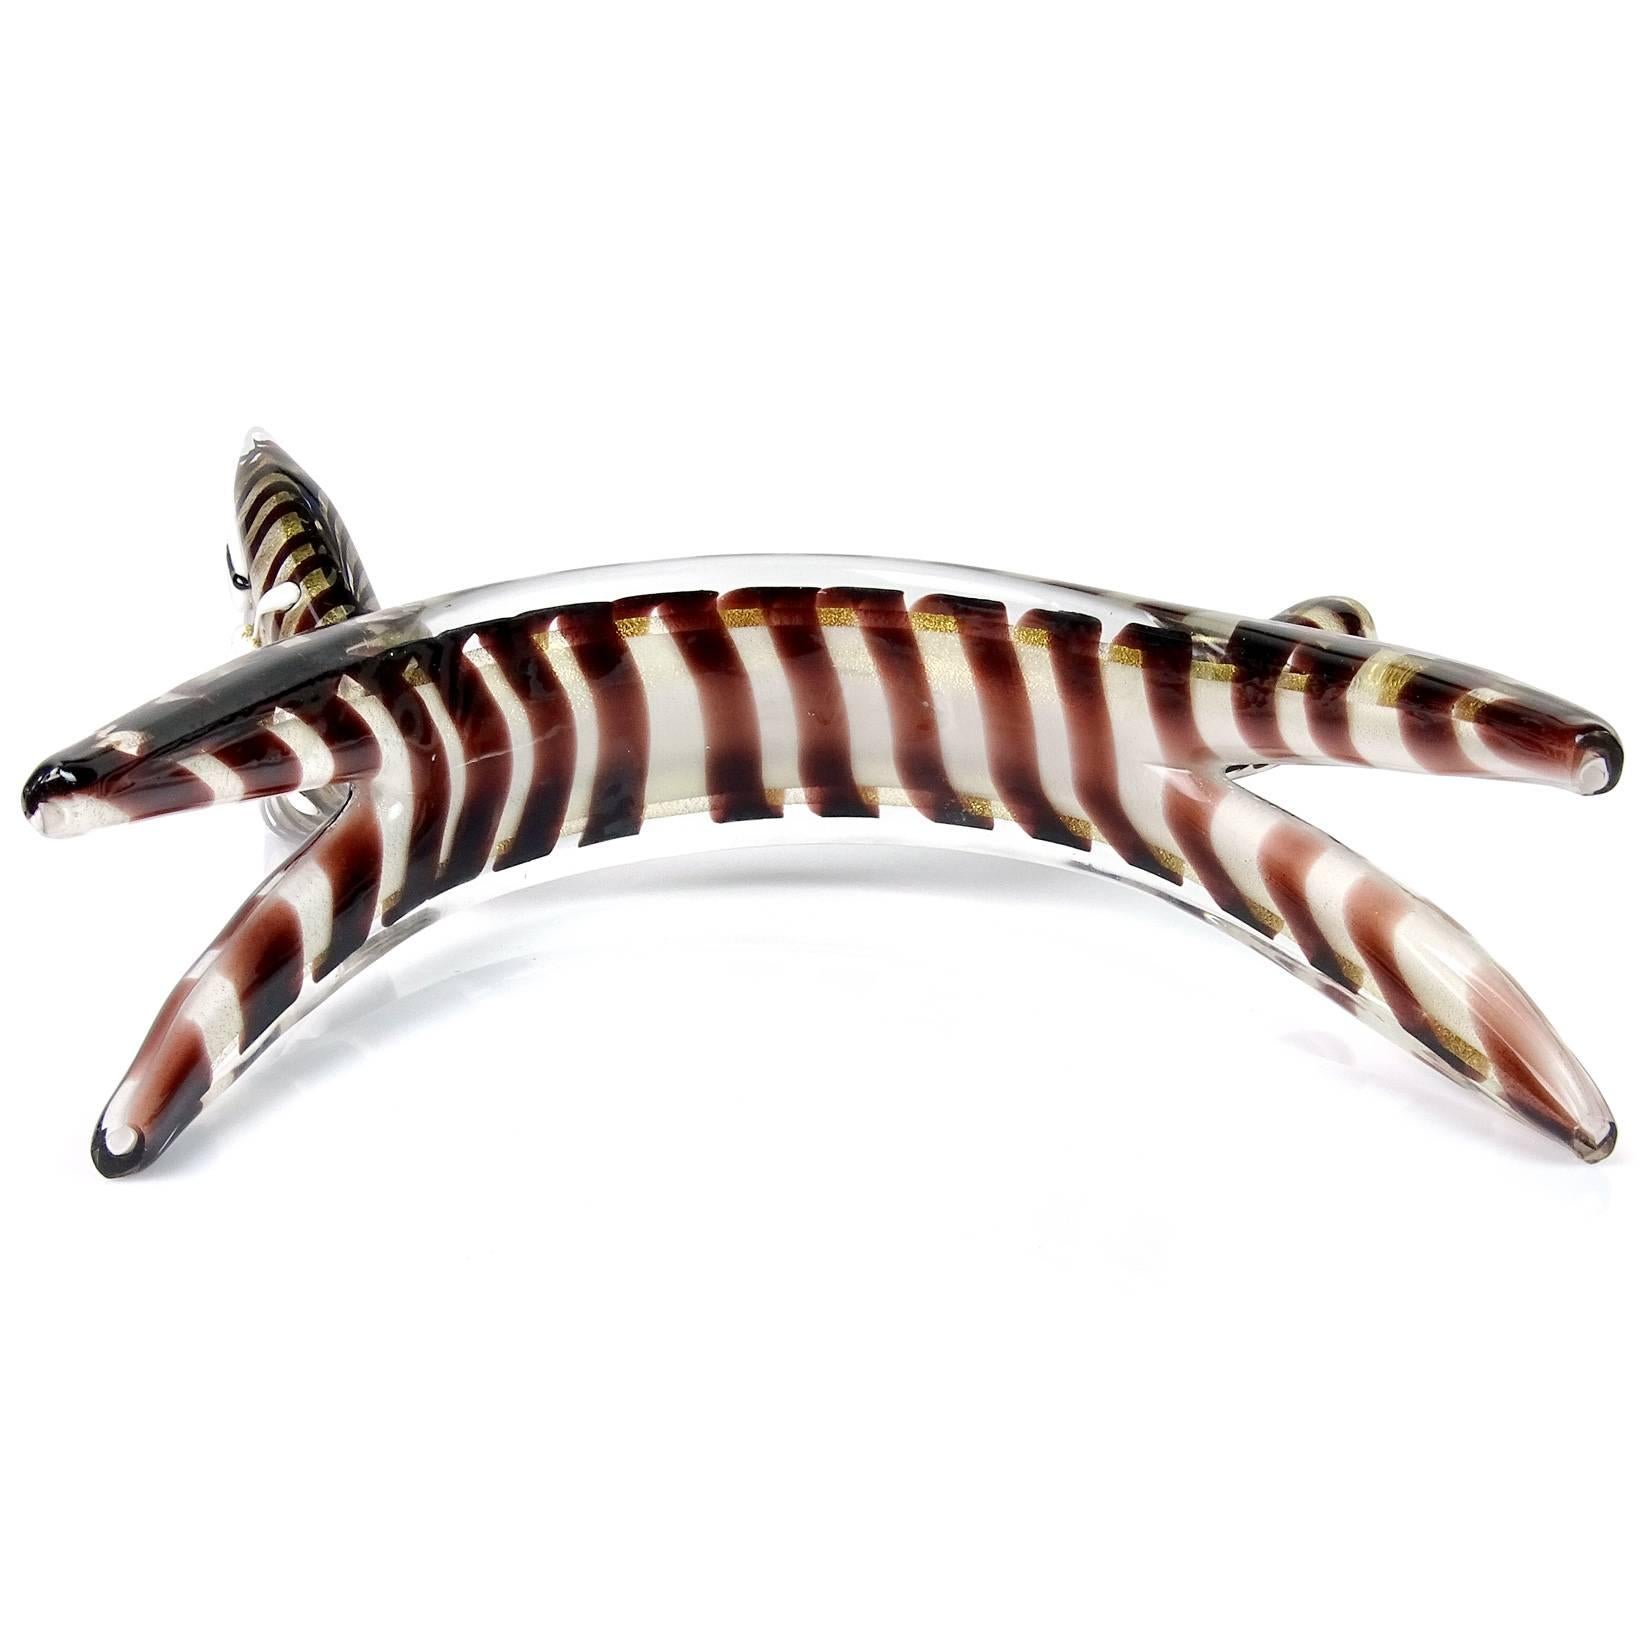 Rare and cute Murano handblown white, gold flecks tiger striped kitty cat Italian art glass sculpture. It has a flattened out shape, with applied eyes and whiskers. Looks like it is scared or just stretching. Measures: 10